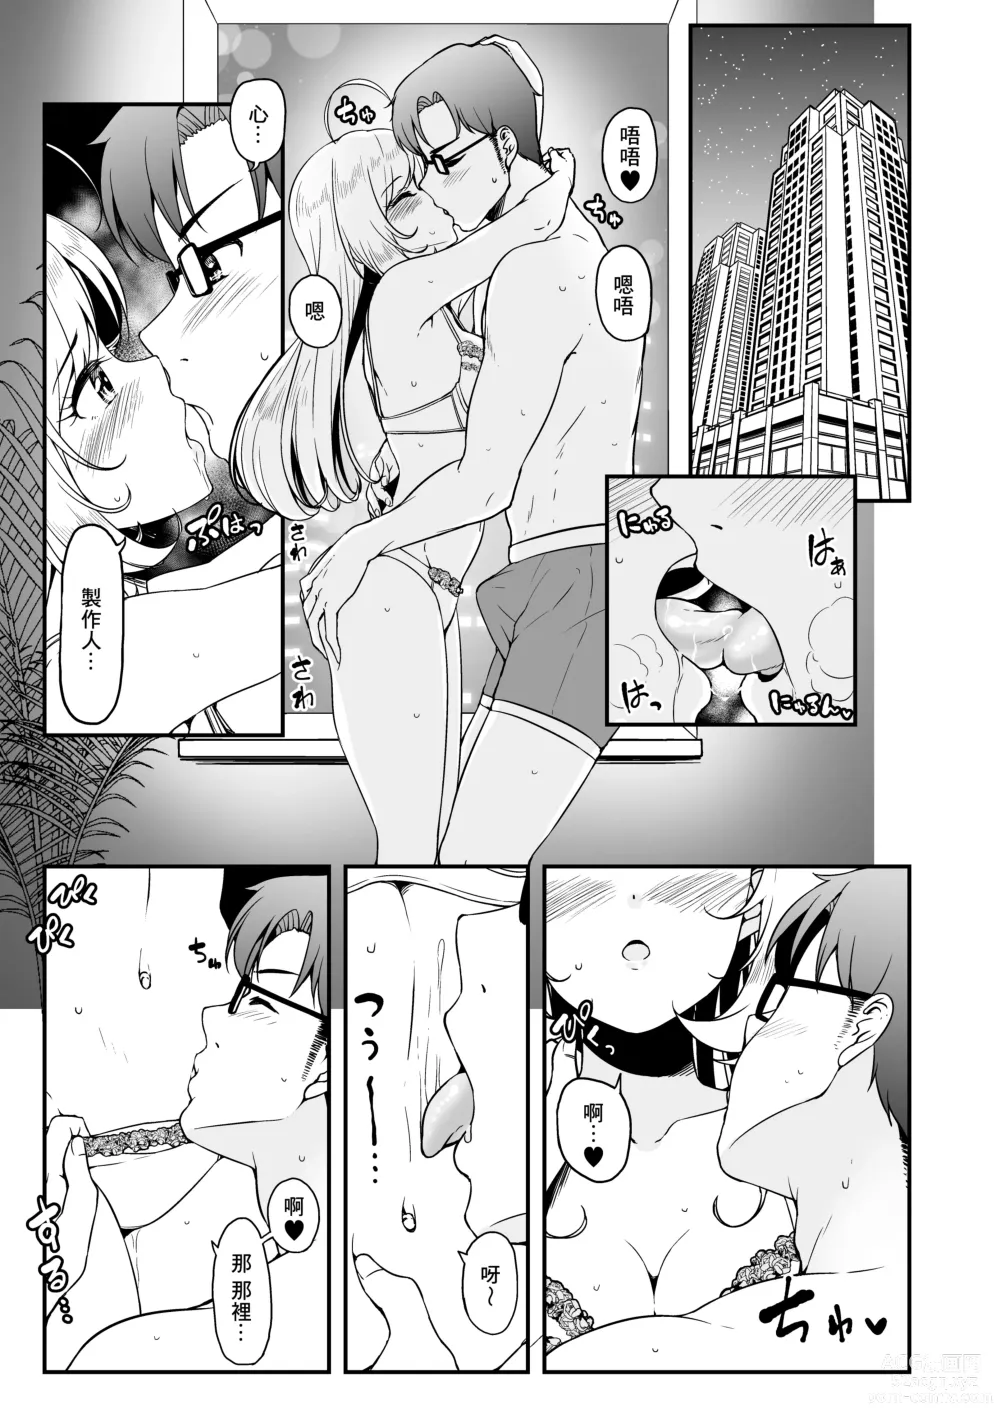 Page 2 of doujinshi sweet make out